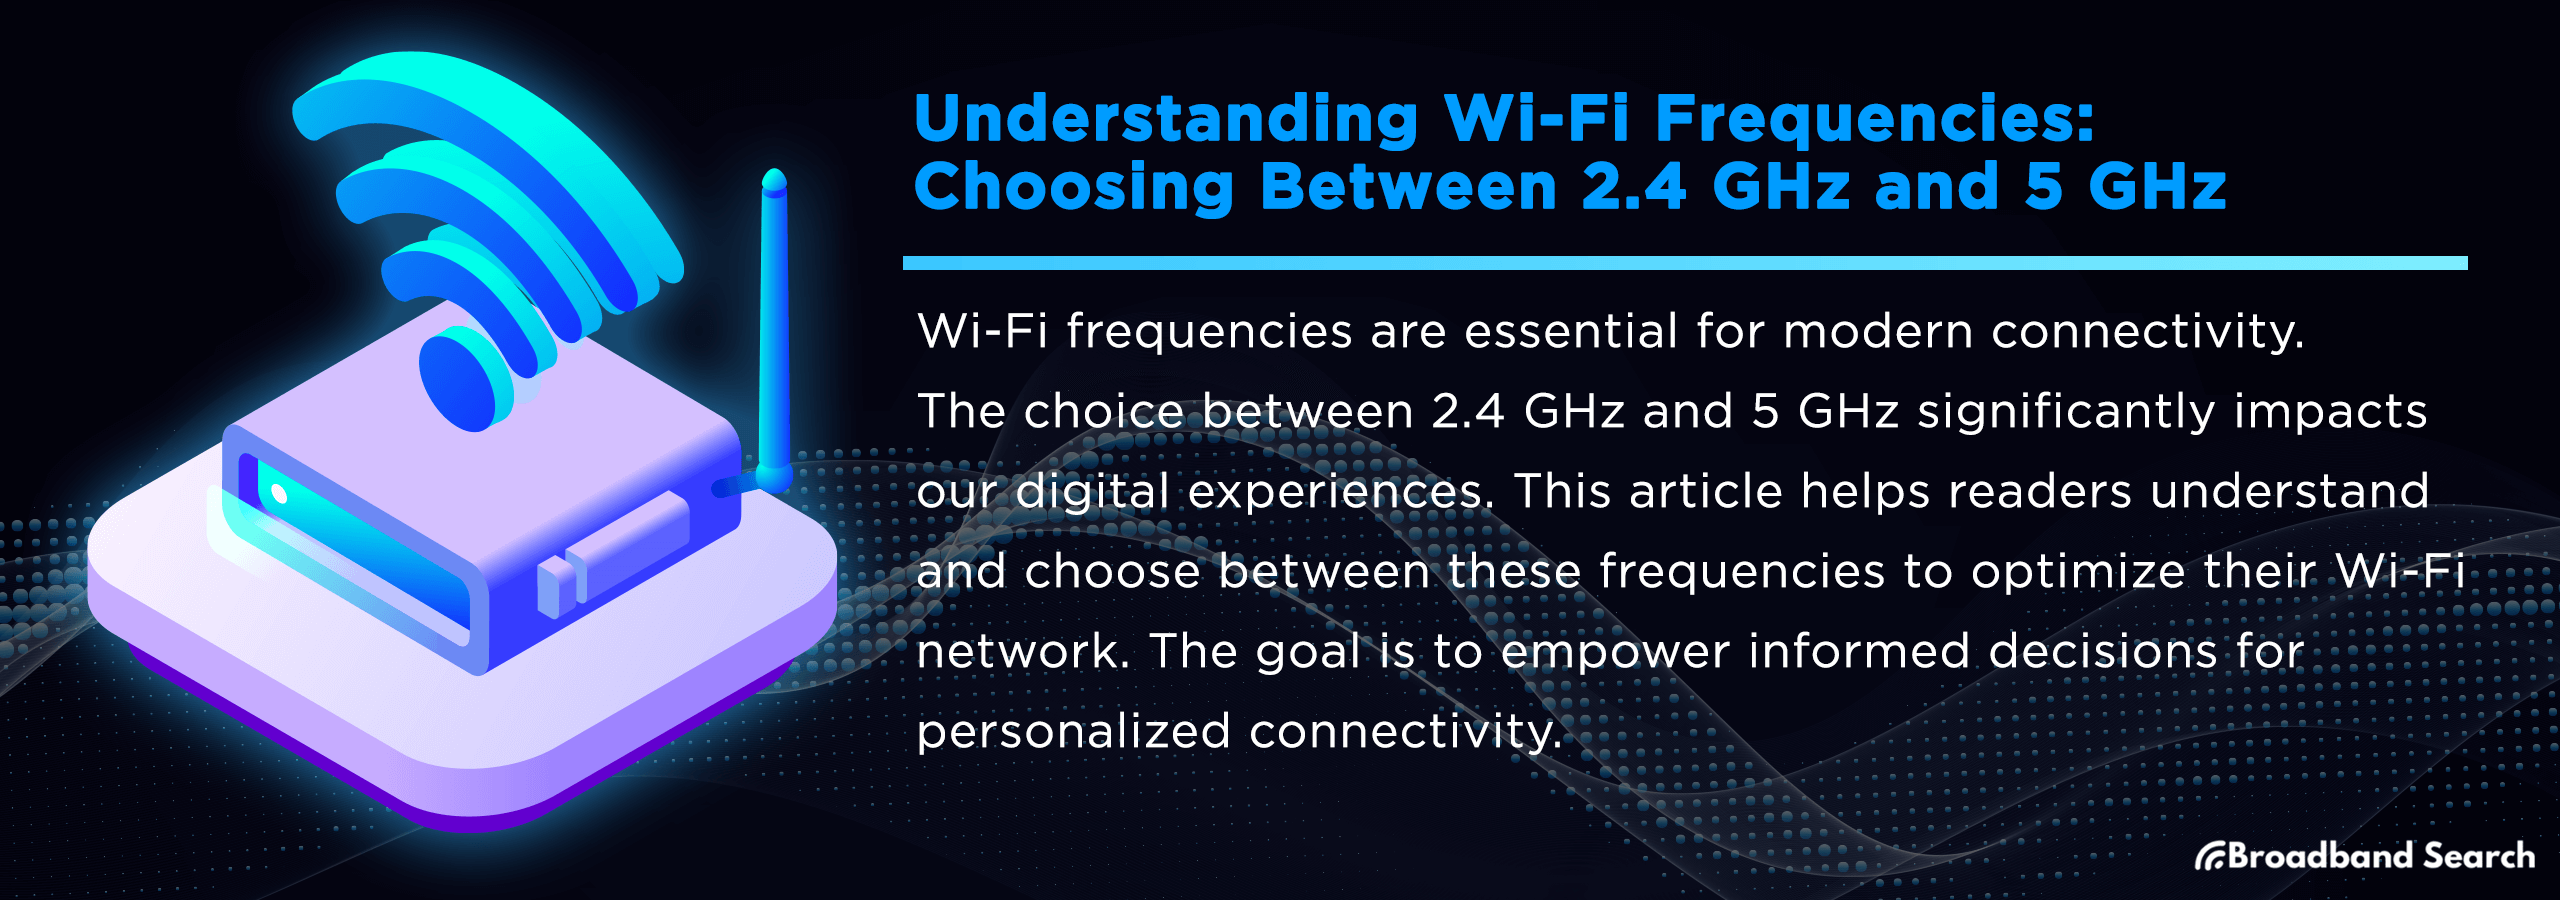 2.4 GHz or 5 GHz: Guiding Your Wi-Fi Choice